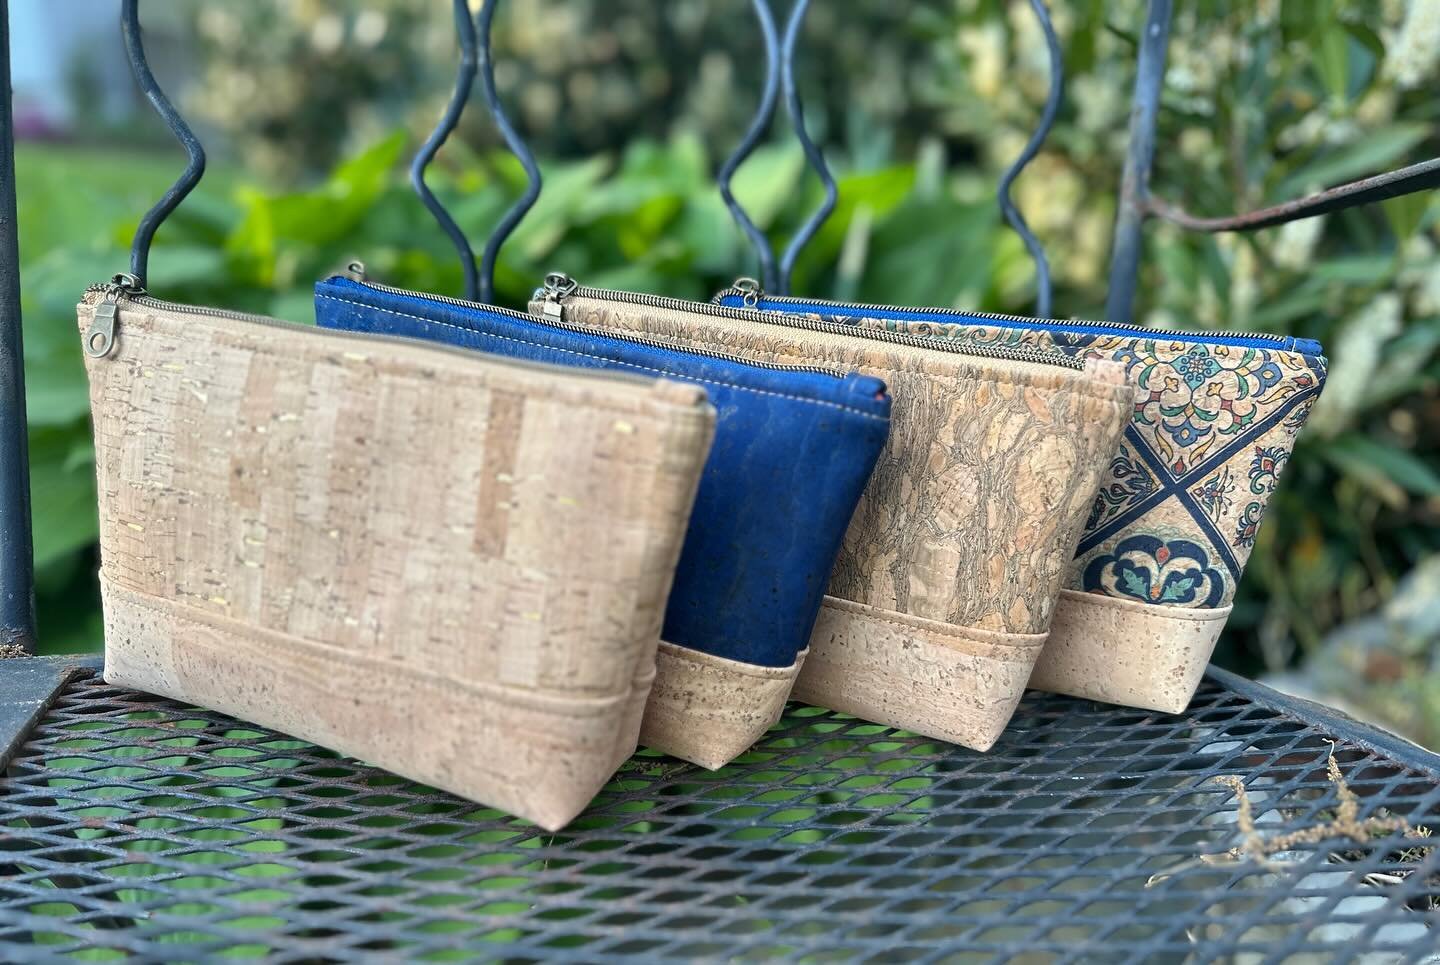 I love these small  cork fabric pouches.  This batch is ready to hang out in Silver Spring and Olney this weekend.#corkfabric #cosmeticpouch #craftshowprep #marylandcraftshows